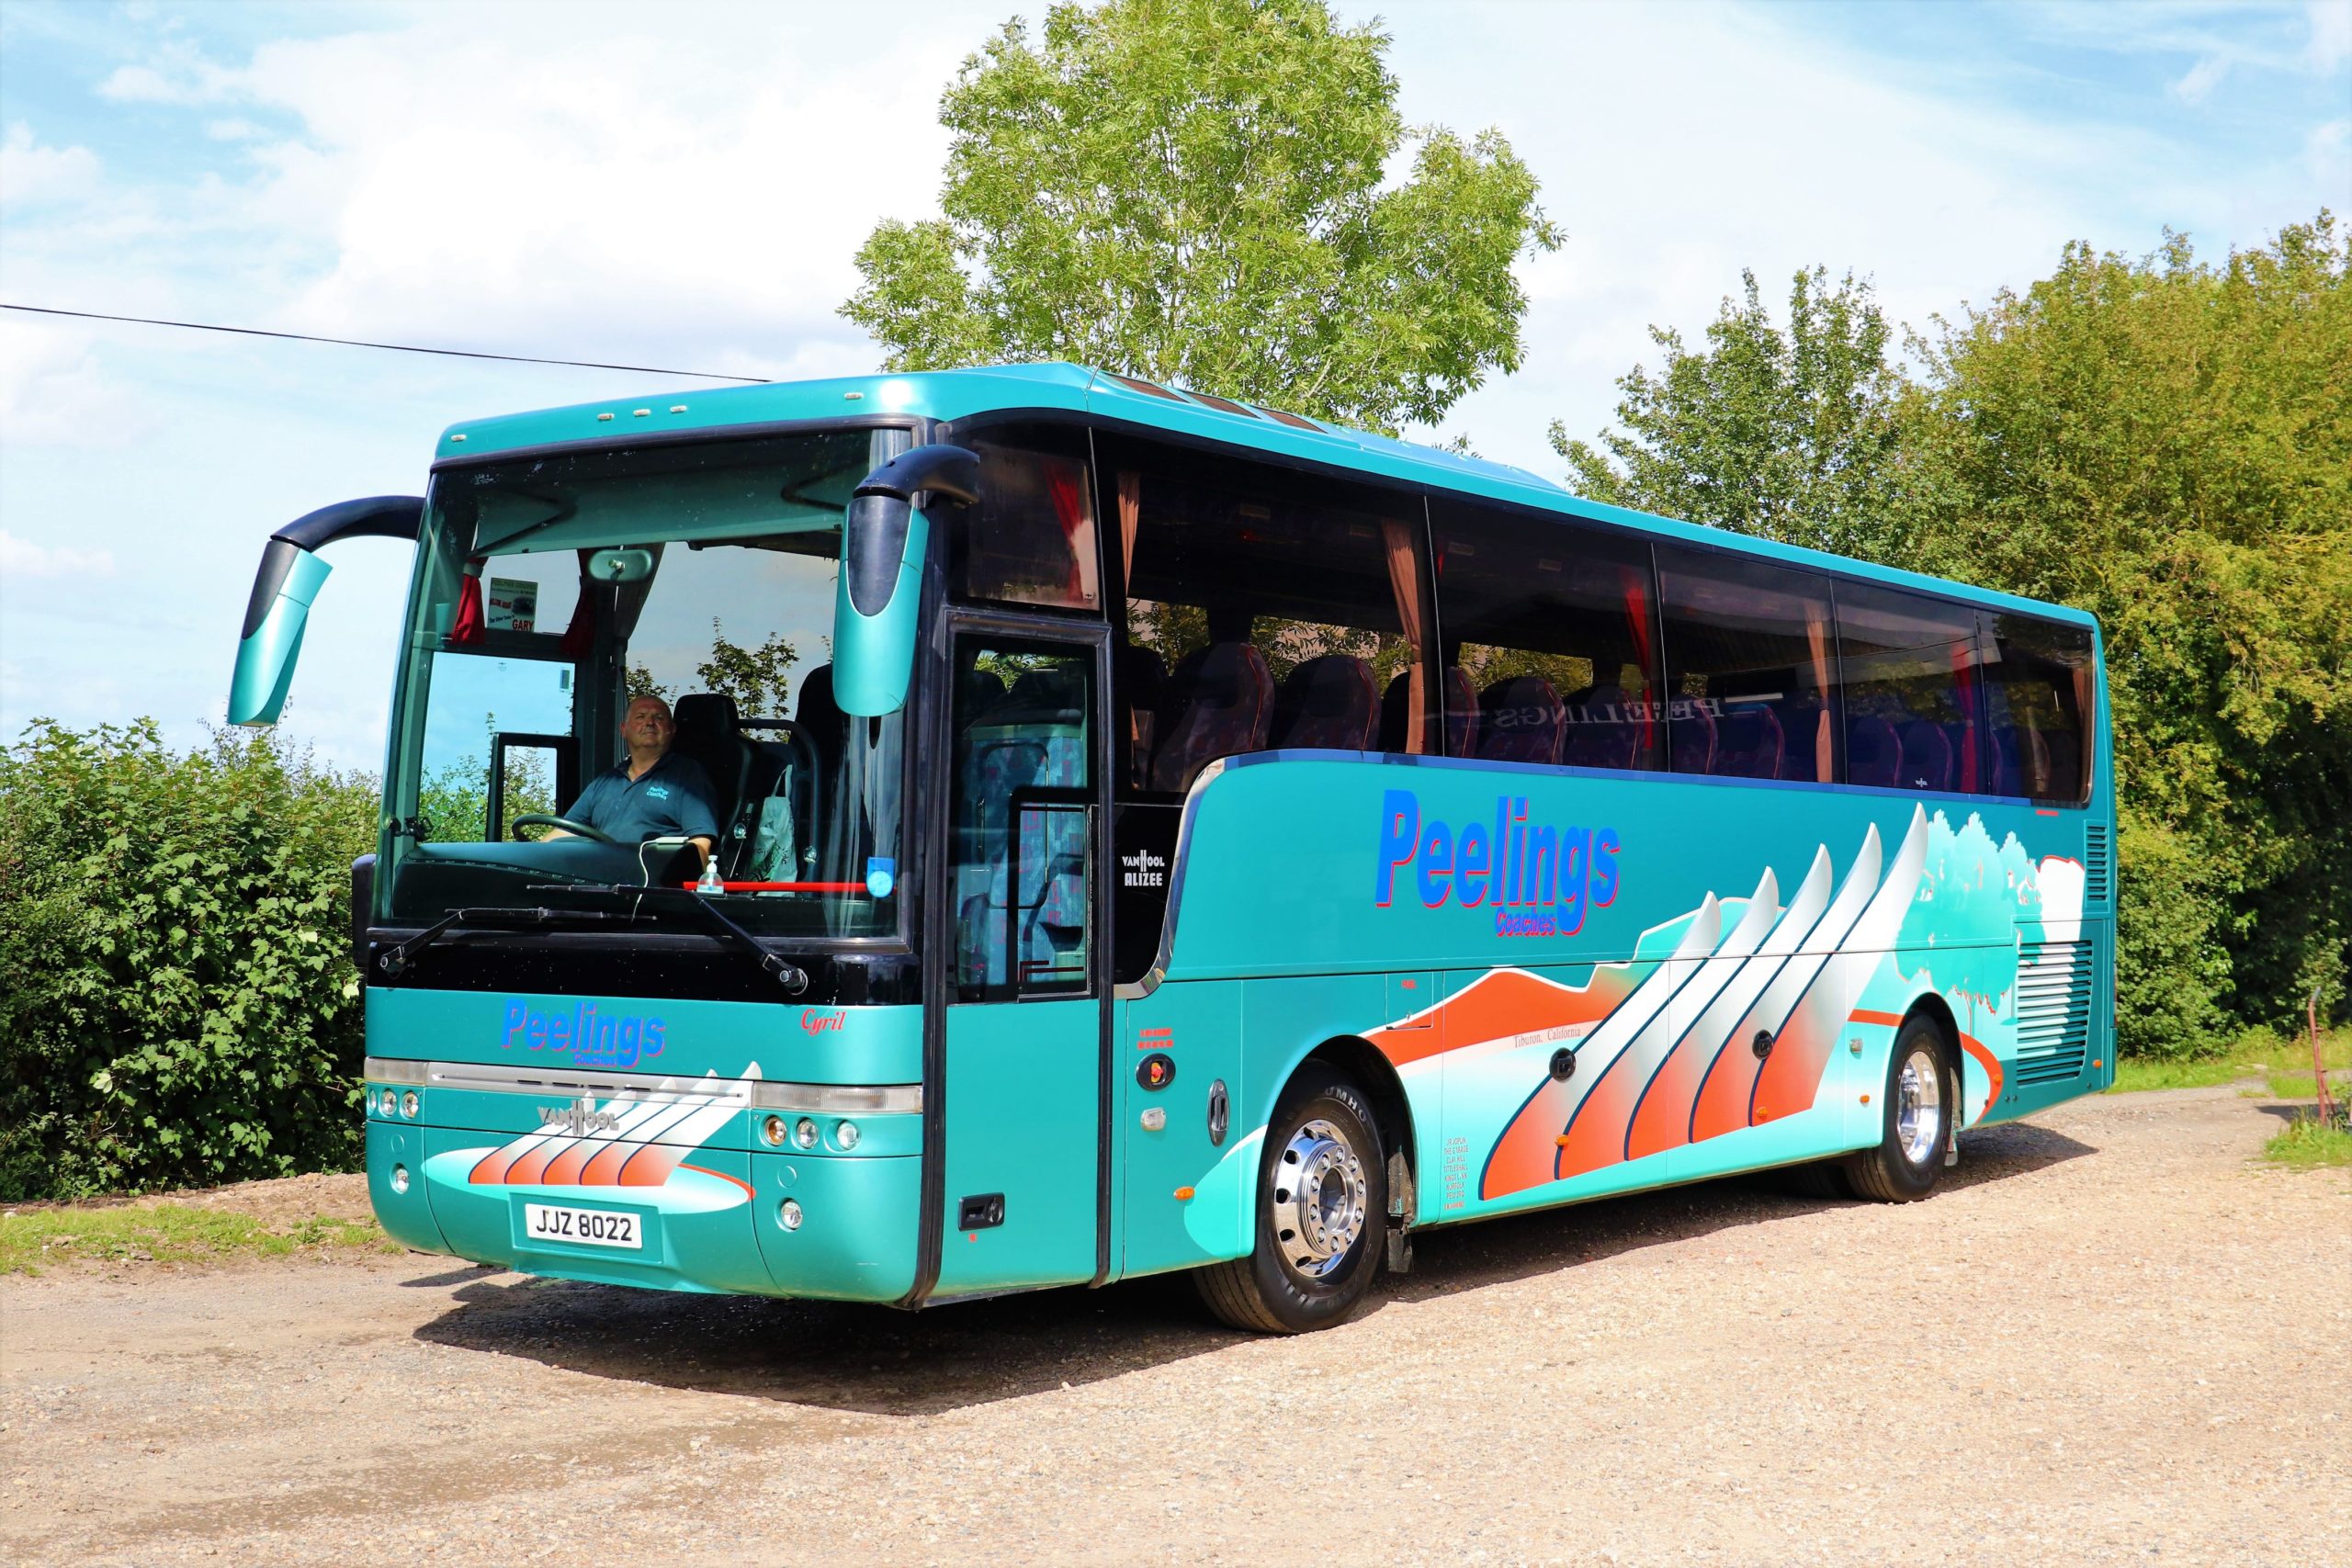 Formerly with Cyril Kenzie’s Shepreth based fleet, this Van Hool Alizee T9 Volvo B12B continues to carry the special livery it wore with Kenzie’s and is named Cyril